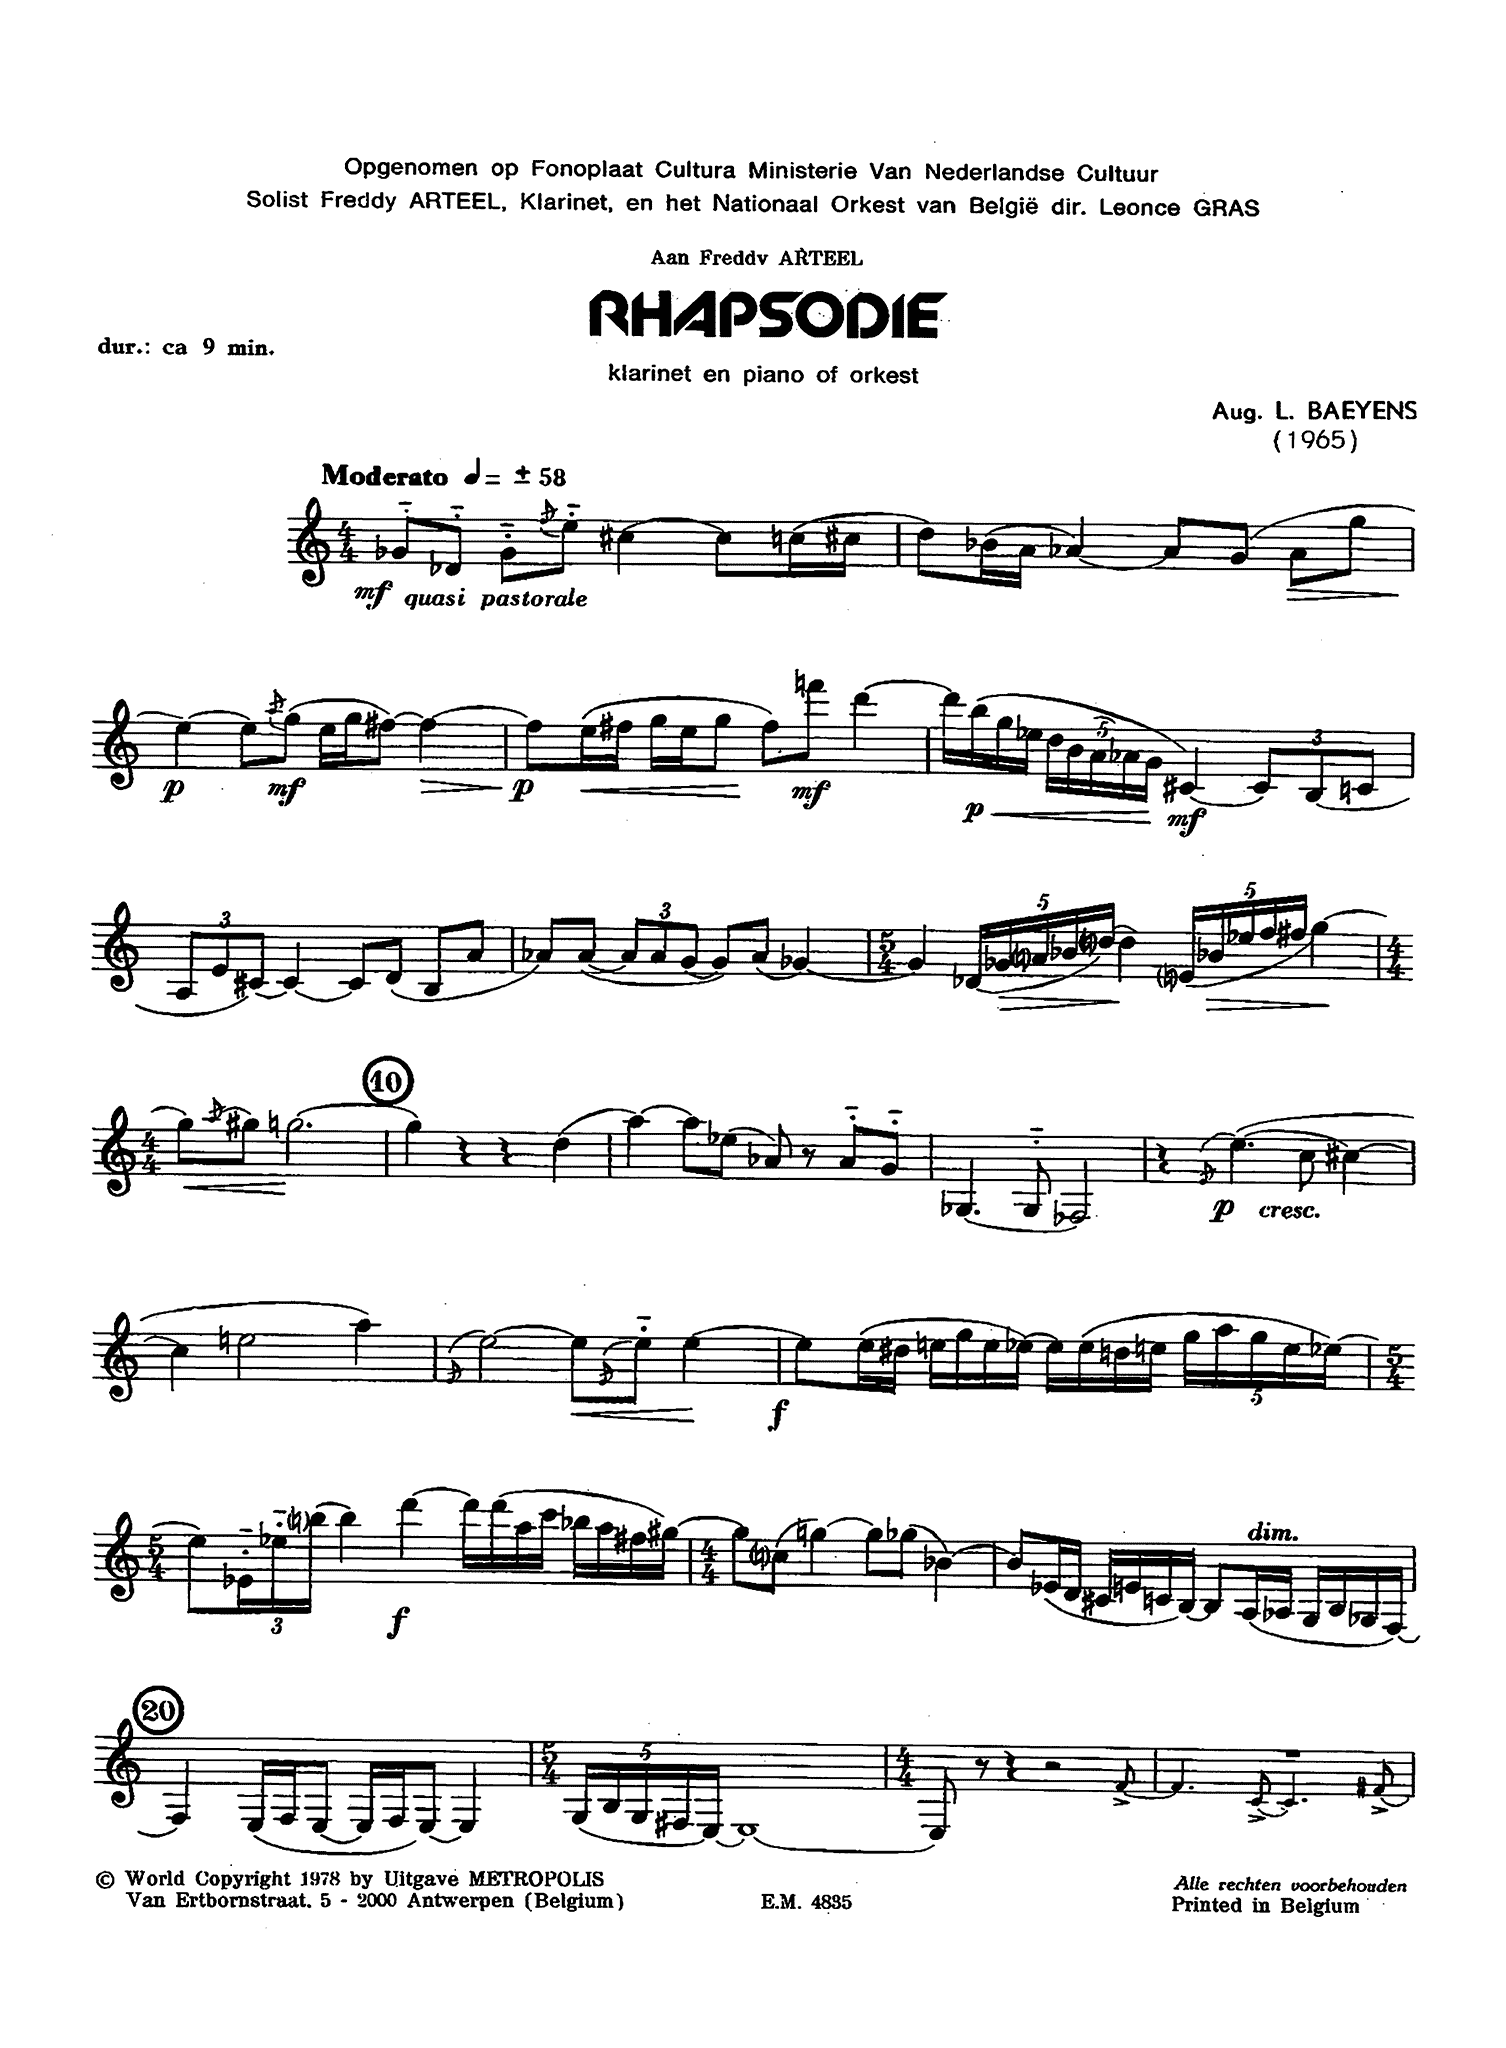 August Baeyens Rhapsodie clarinet and piano solo part